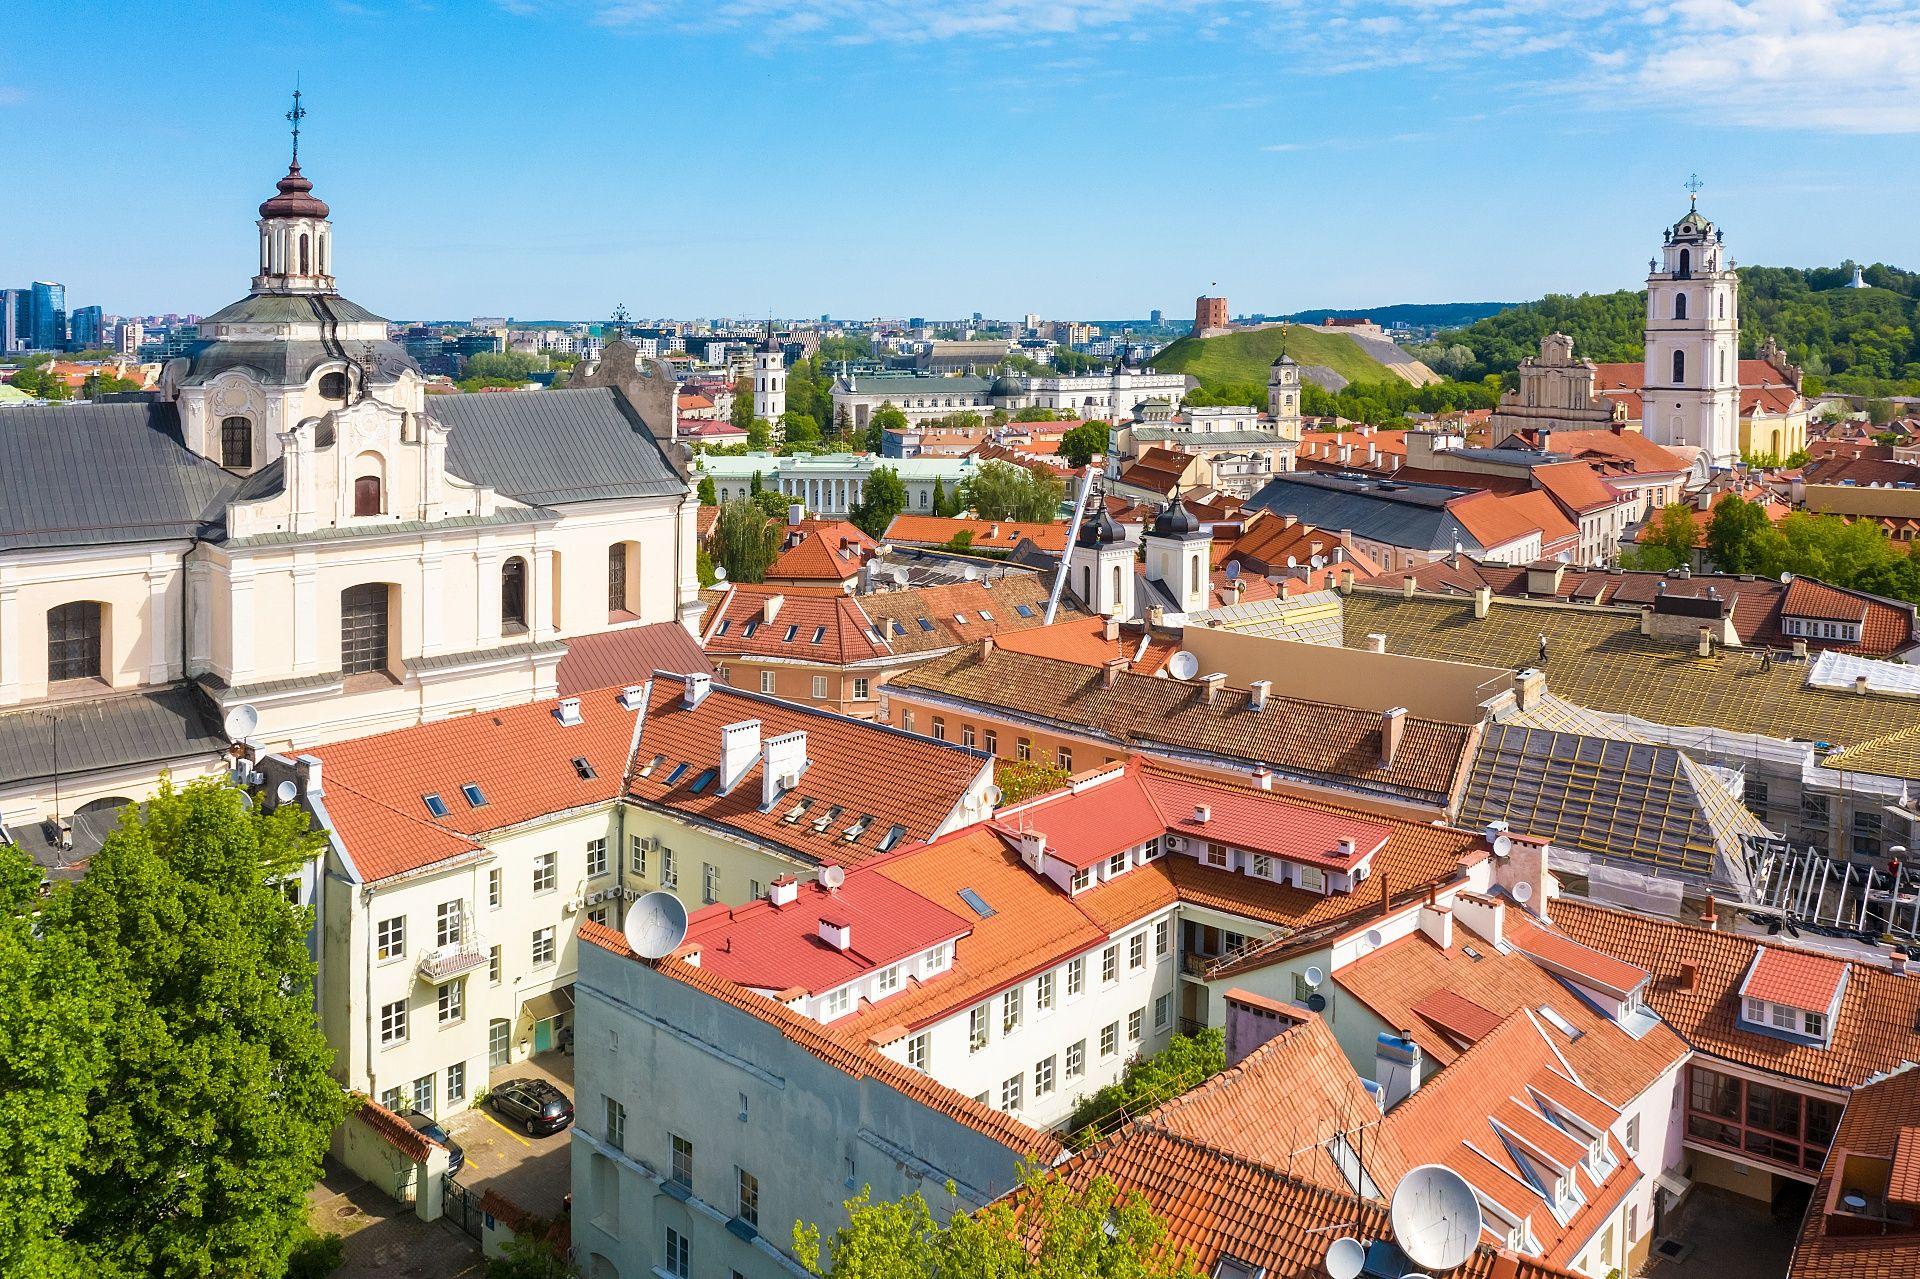 Cover image from Lithuania Travel appoints AVIAREPS as Representative in the United Kingdom 